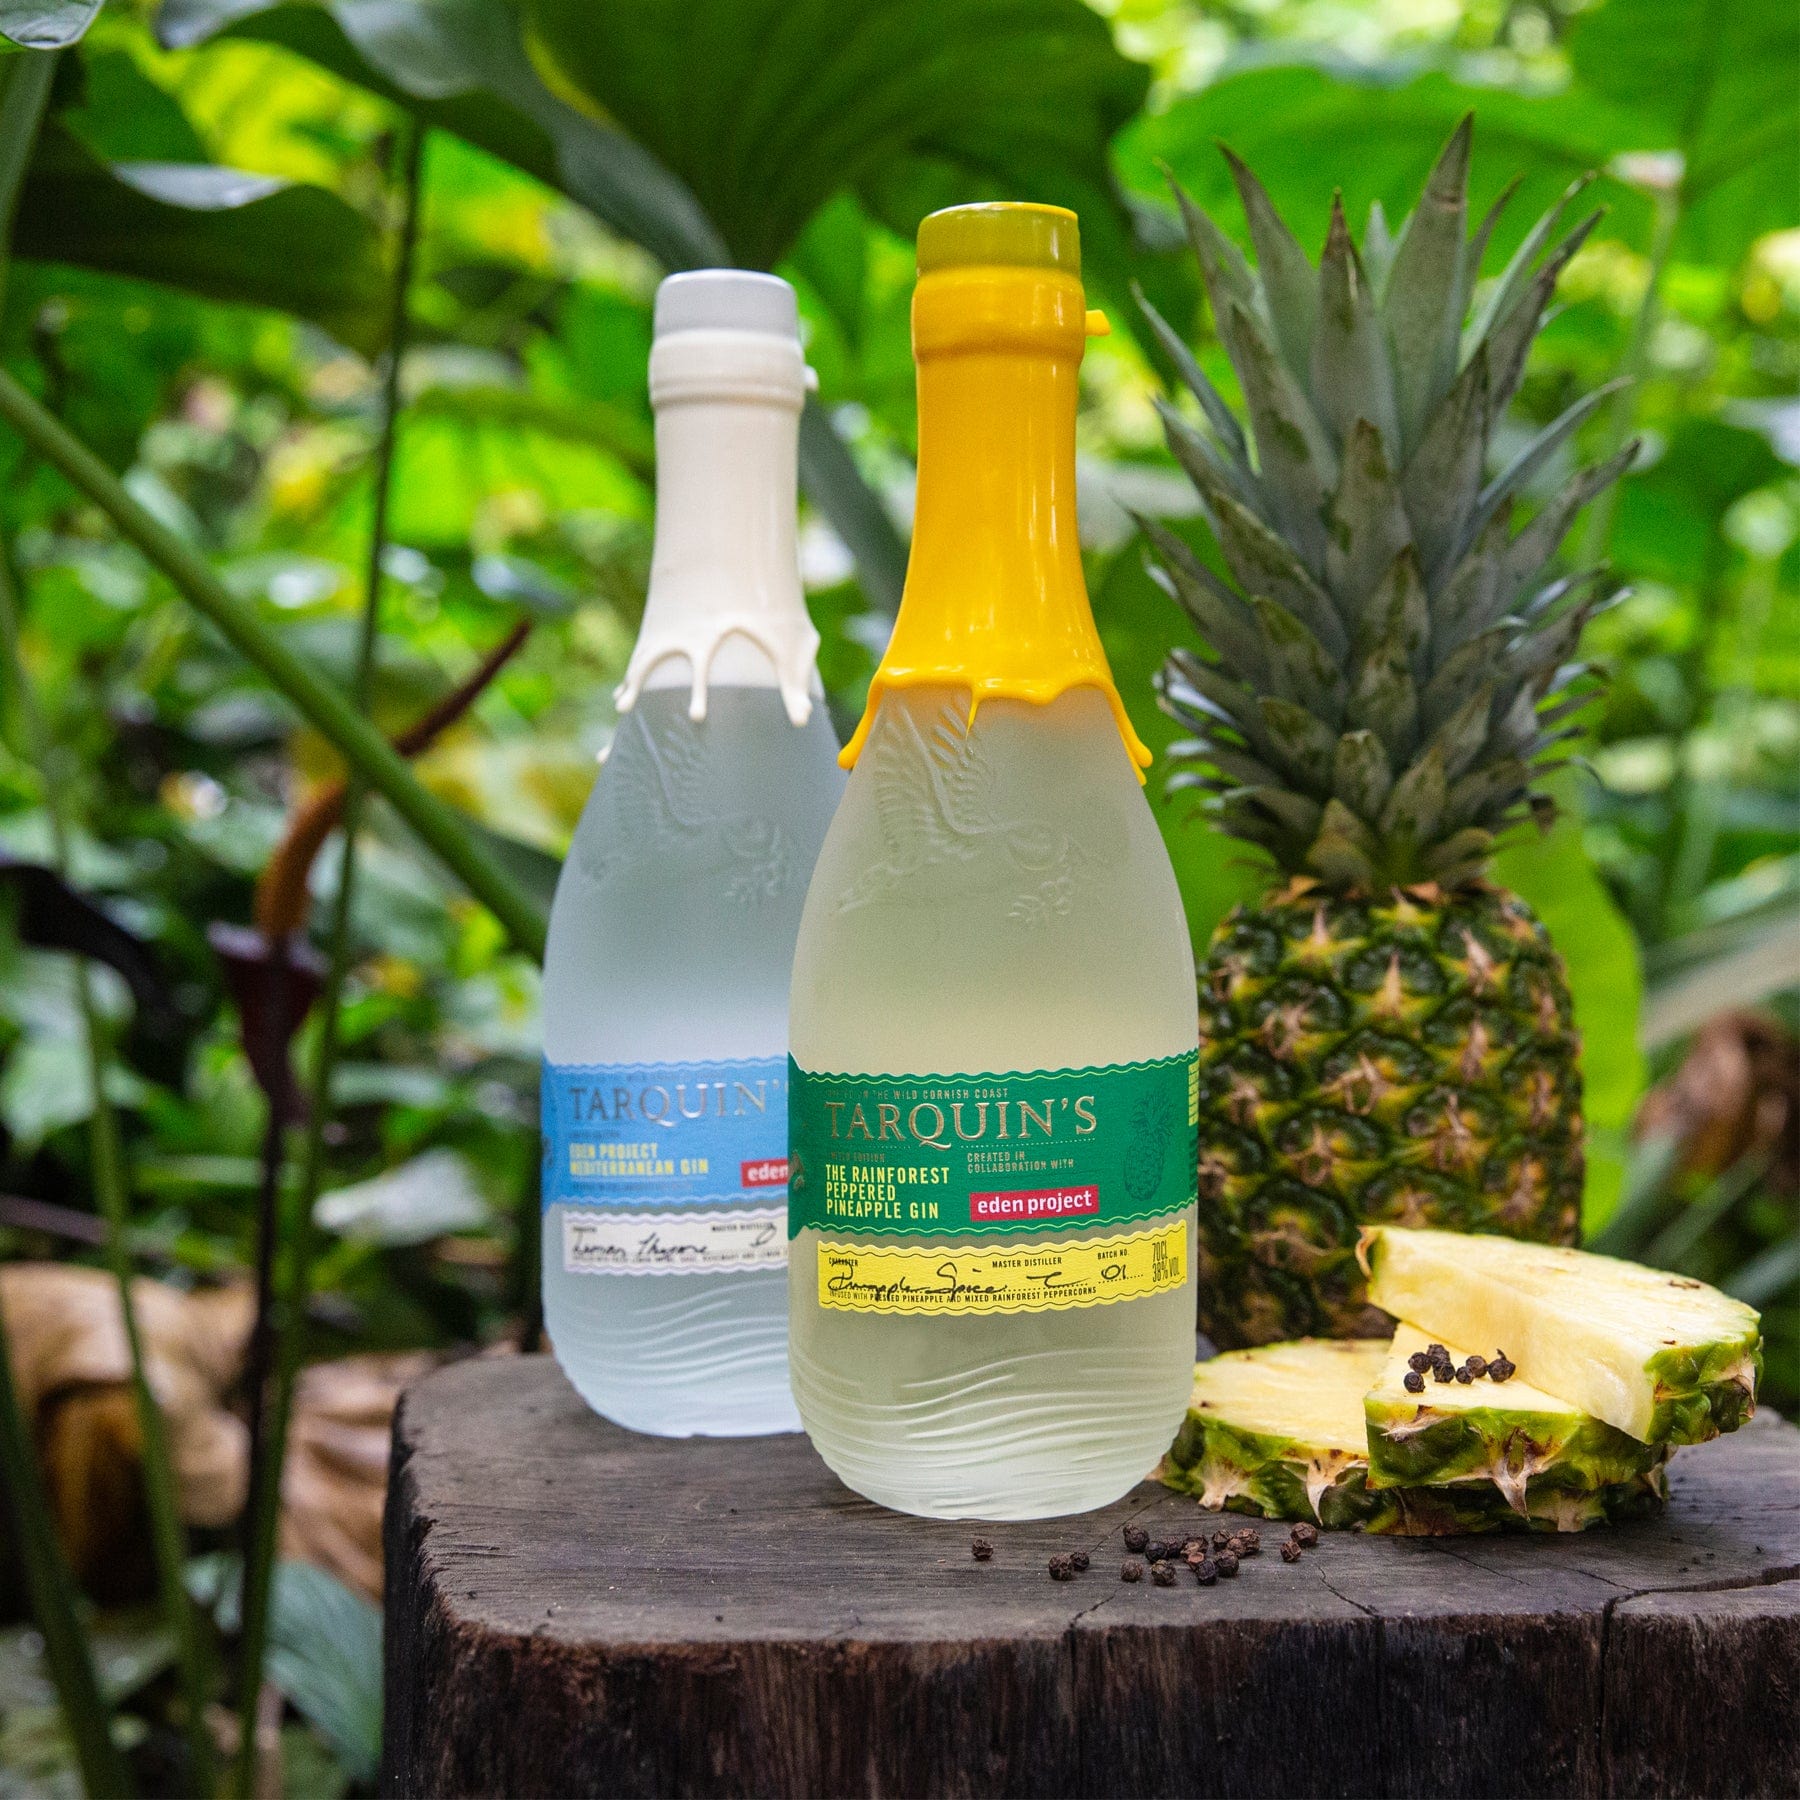 Alt text: Two bottles of Tarquin's gin on a wooden stump, one clear and one yellow, next to a whole pineapple and pineapple slices, with lush green foliage in the background.